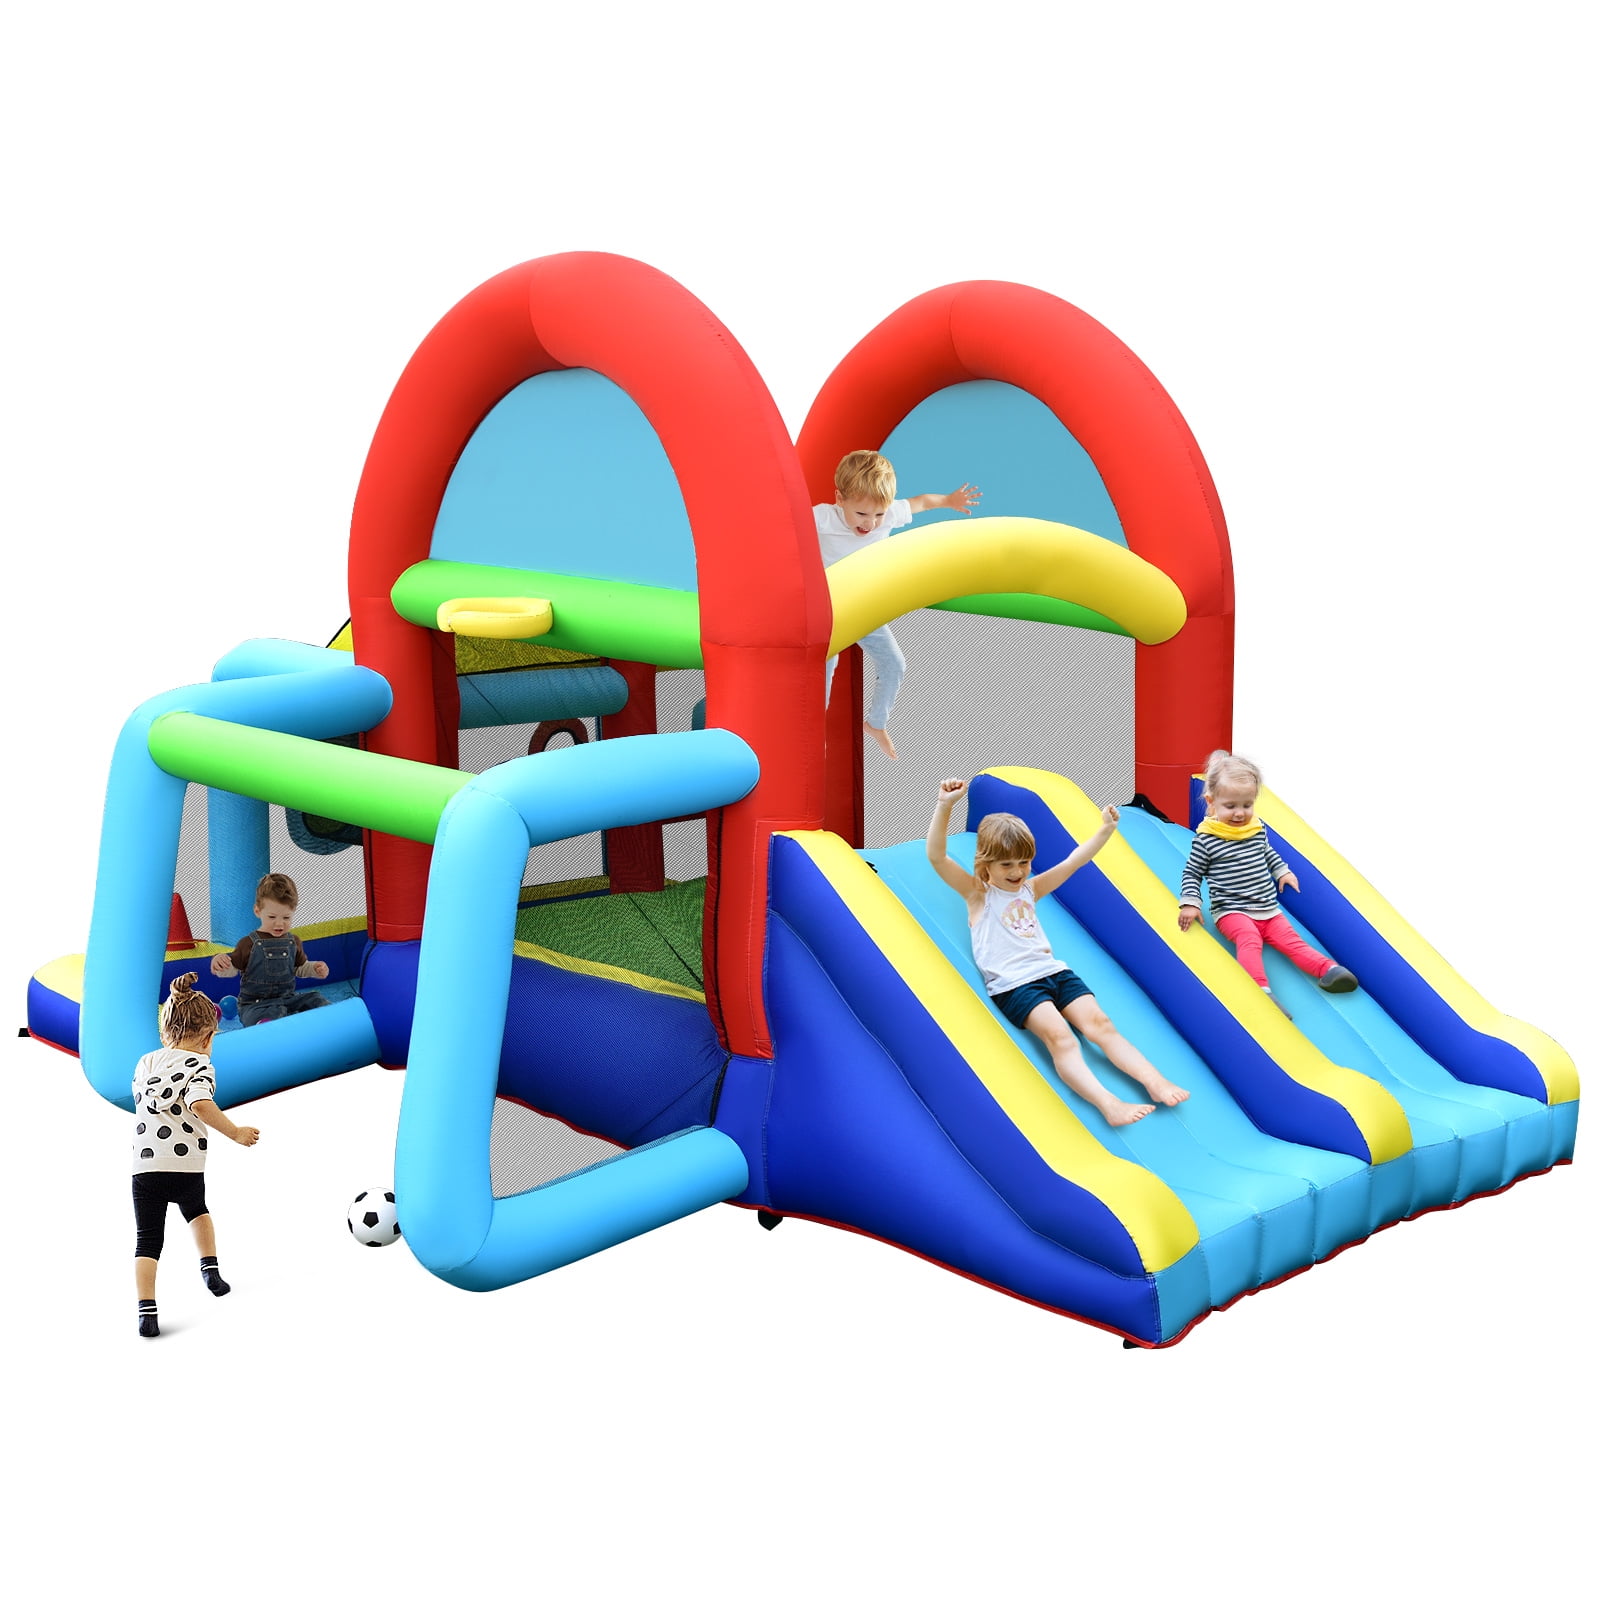 Topbuy Inflatable Bounce House 7-in-1 Kids Bouncer w/ Dual Slides ...